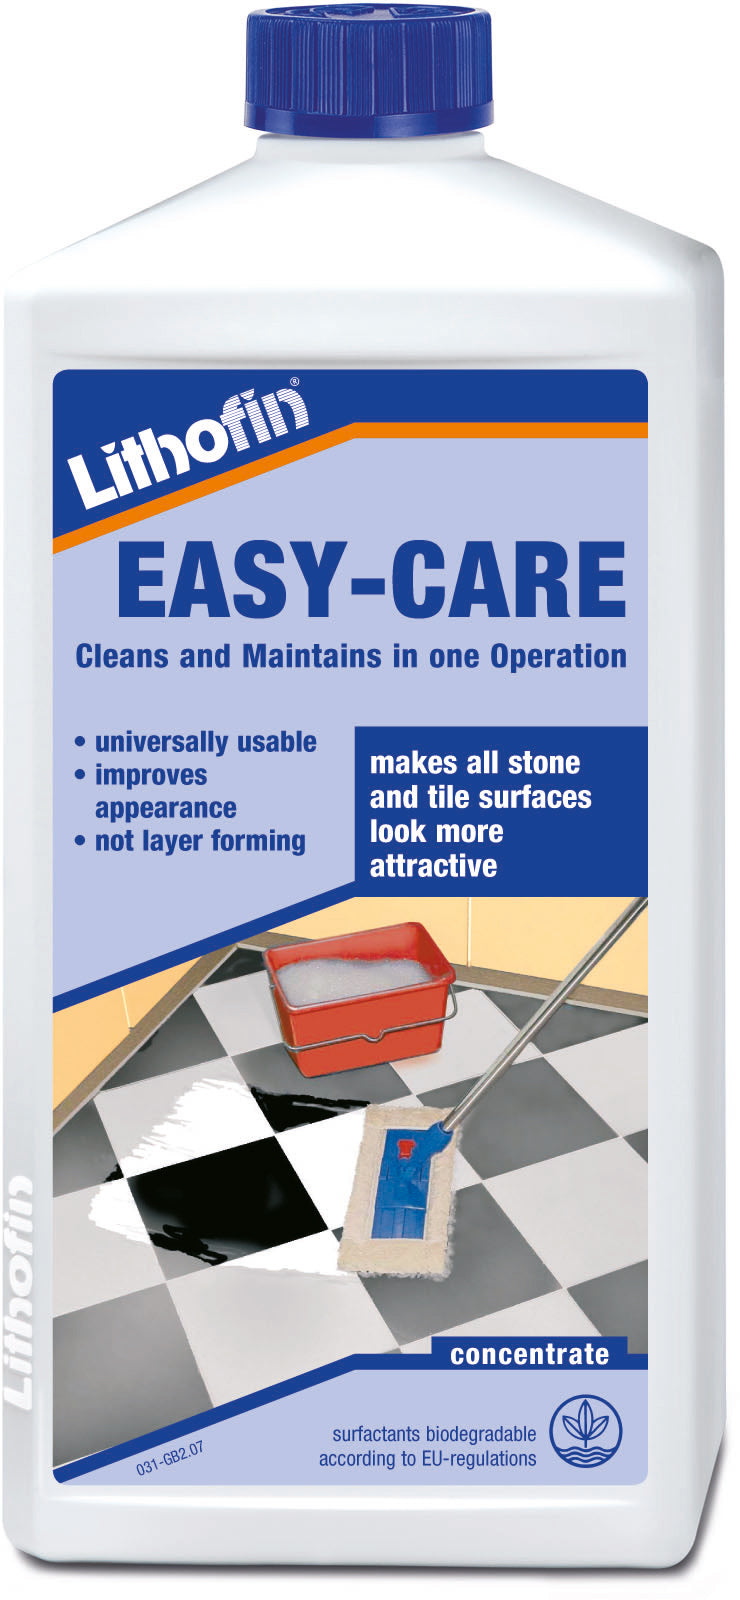 Lithofin Easy-Care - cleans and maintains in one operation